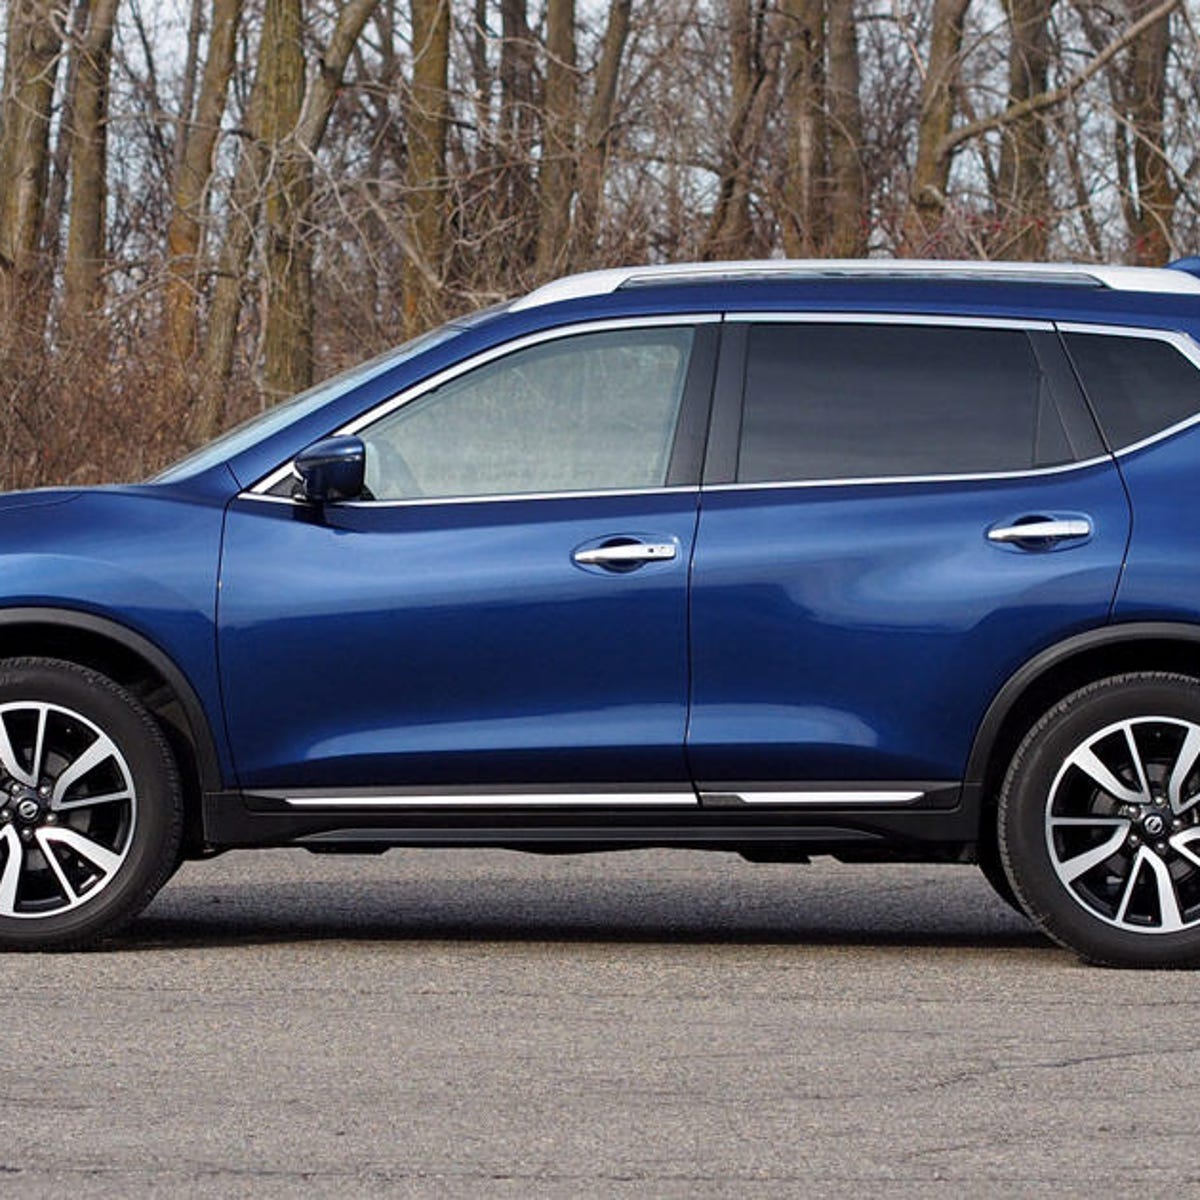 2020 Nissan Rogue review: Aging gracefully - CNET